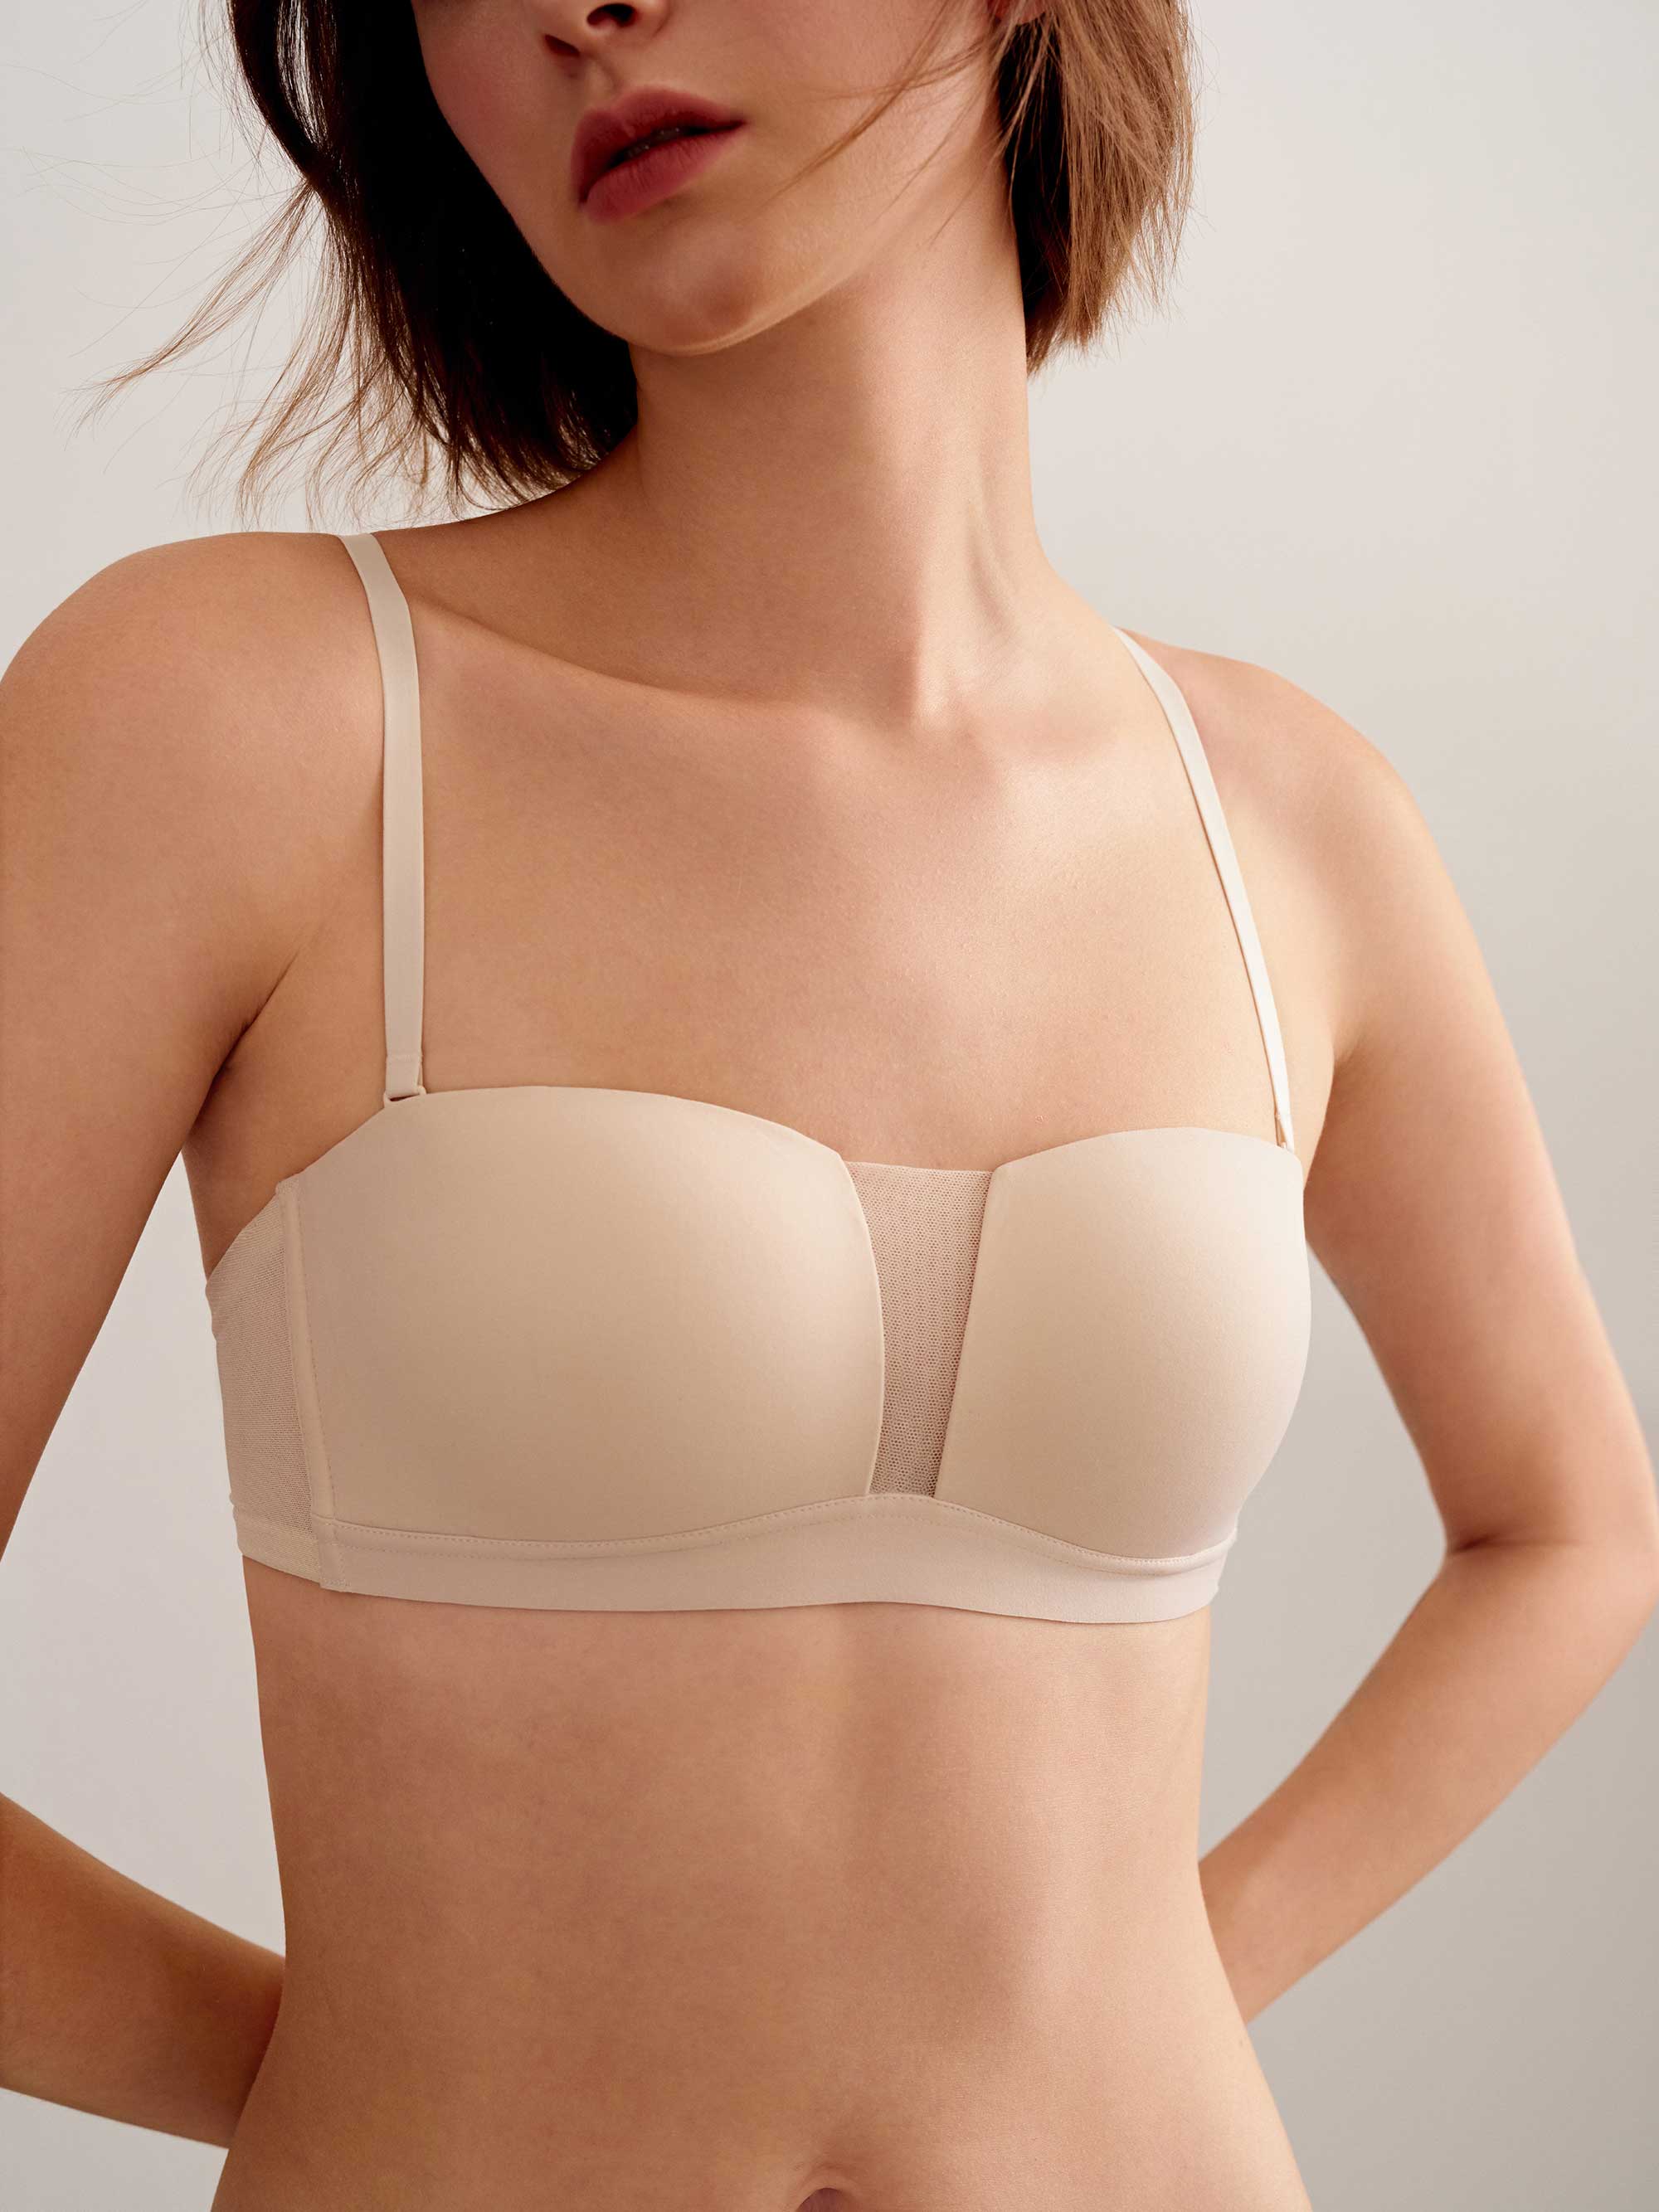 Reveal Women's Low-Key Seamless Bandeau Bra - B30338 S Barely There